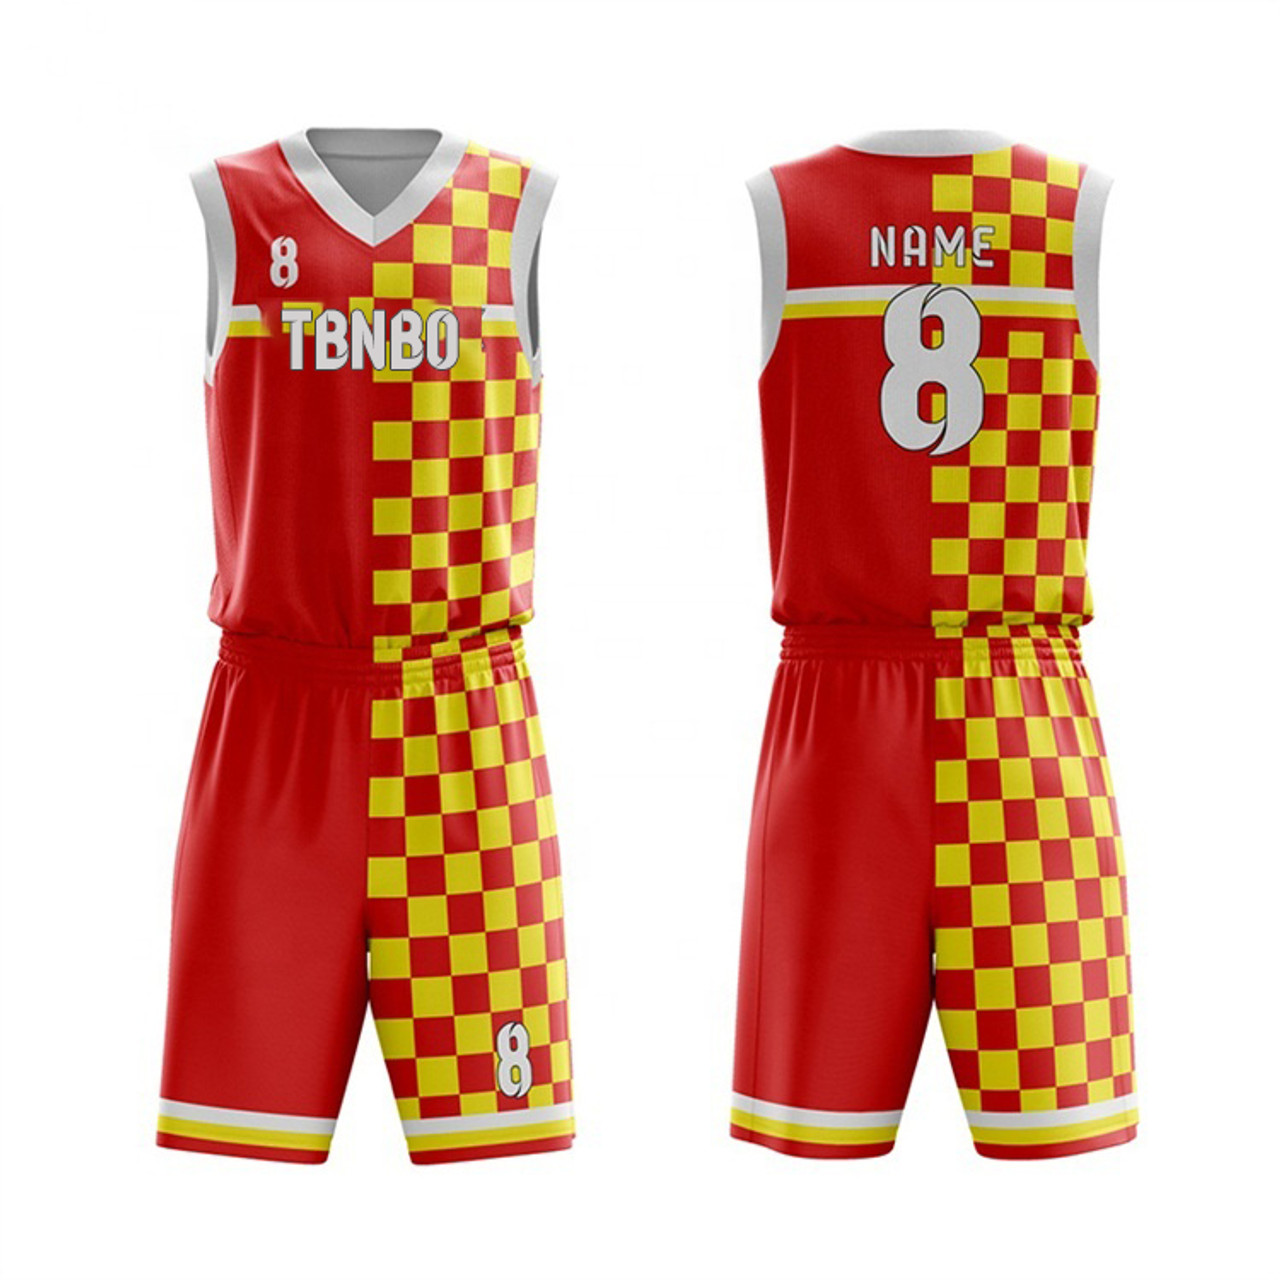 Cheap reversible basketball jerseys shop and manufacturers and suppliers